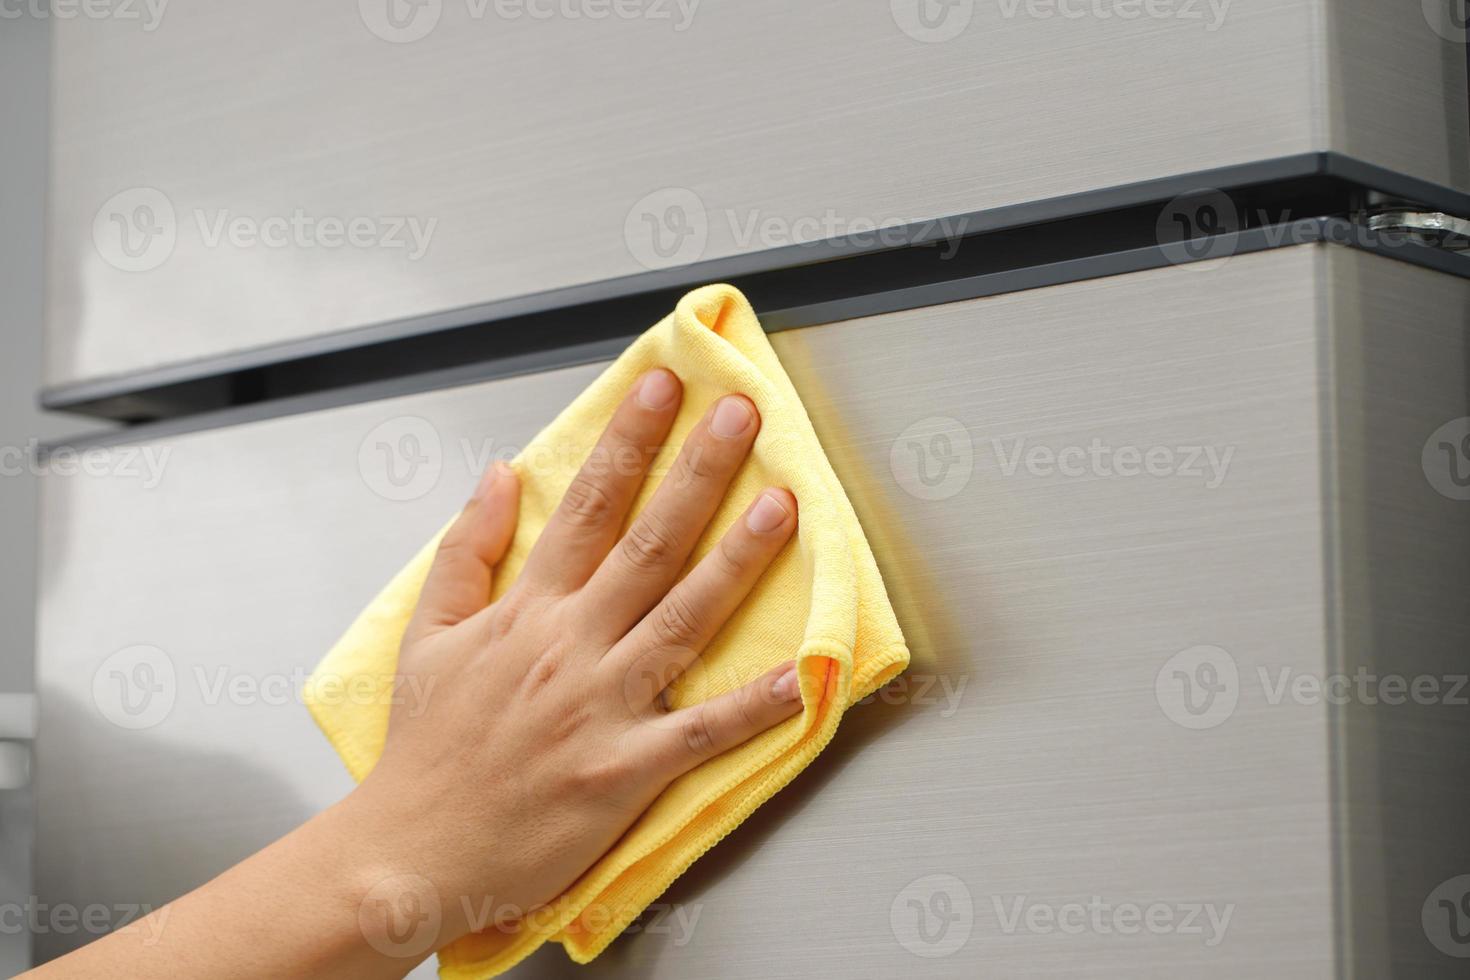 Employees use a cloth to clean the refrigerator. photo